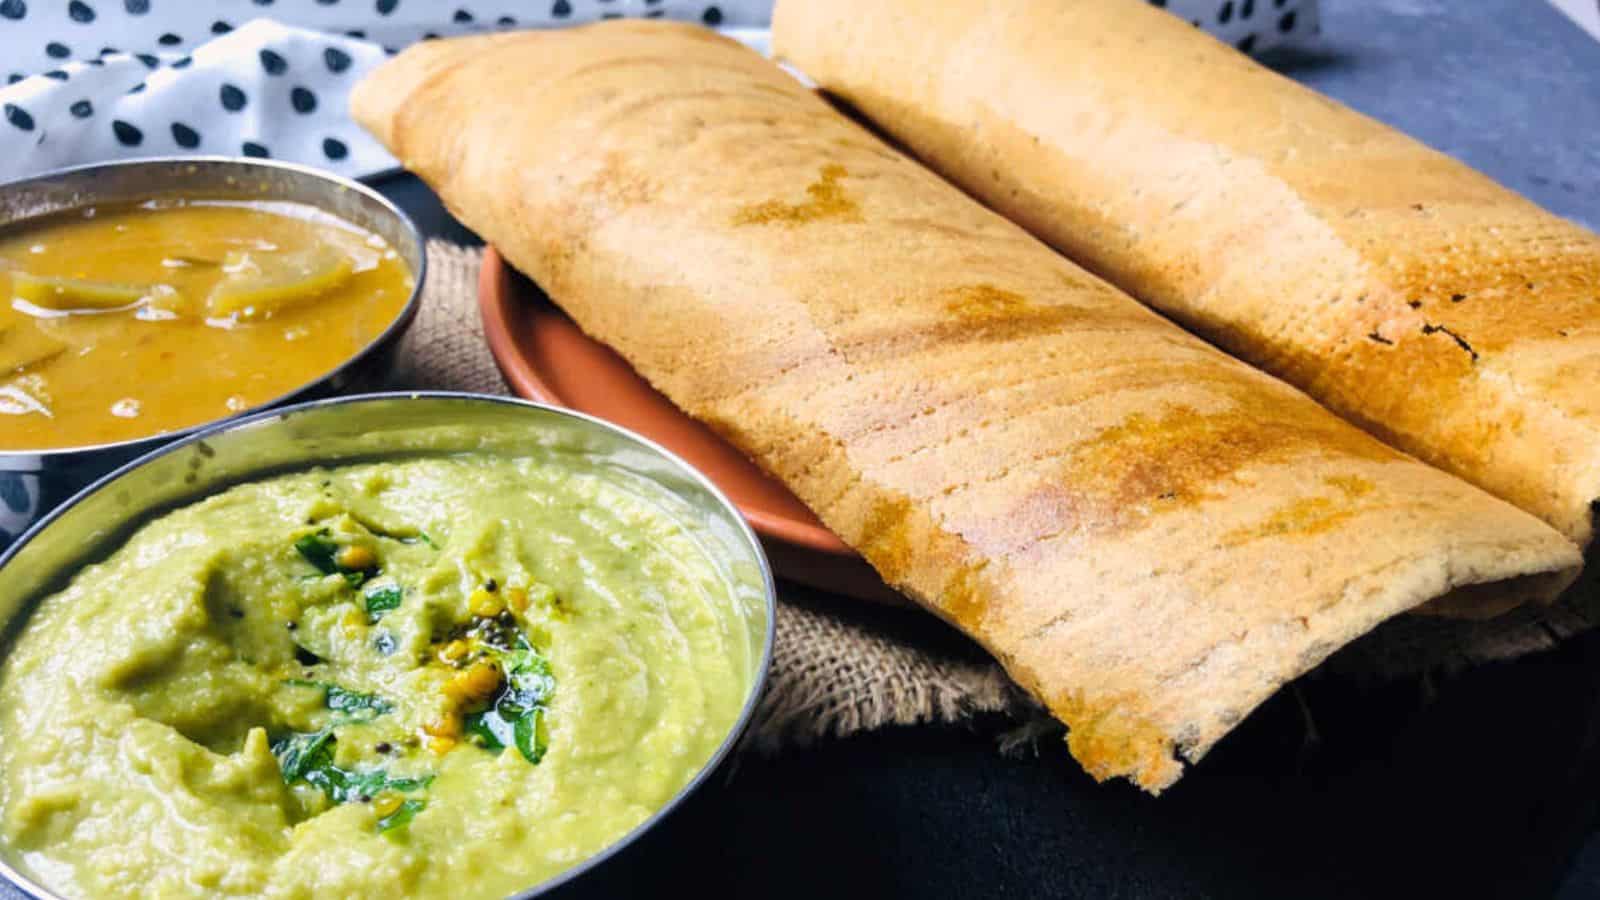 Two dosas served with coconut chutney and sambar in small bowls, placed on a rustic fabric surface.